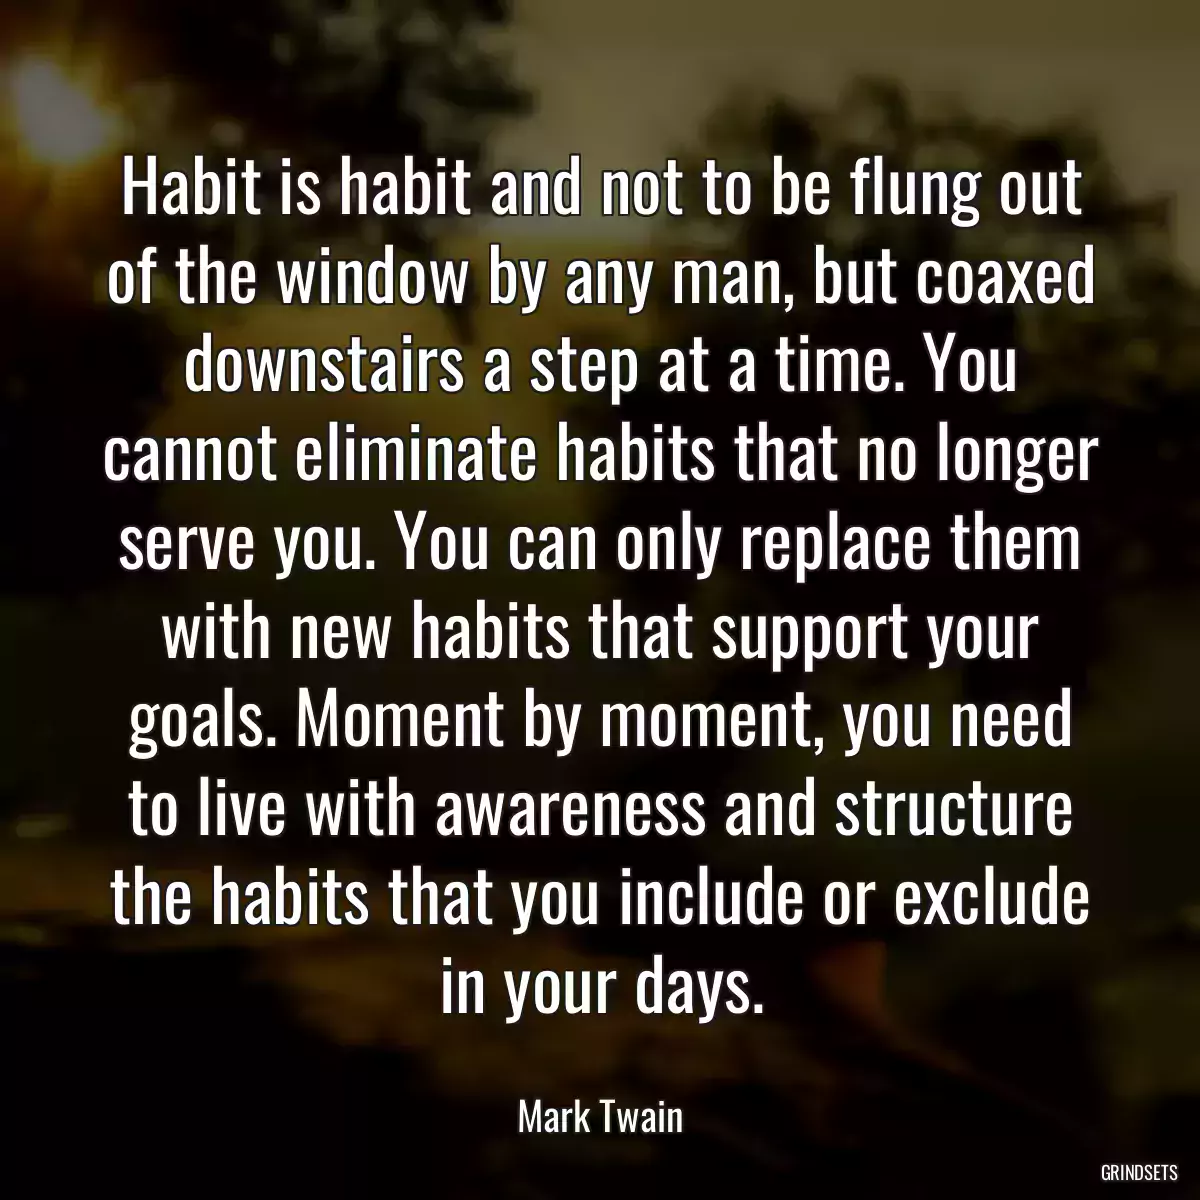 Habit is habit and not to be flung out of the window by any man, but coaxed downstairs a step at a time. You cannot eliminate habits that no longer serve you. You can only replace them with new habits that support your goals. Moment by moment, you need to live with awareness and structure the habits that you include or exclude in your days.